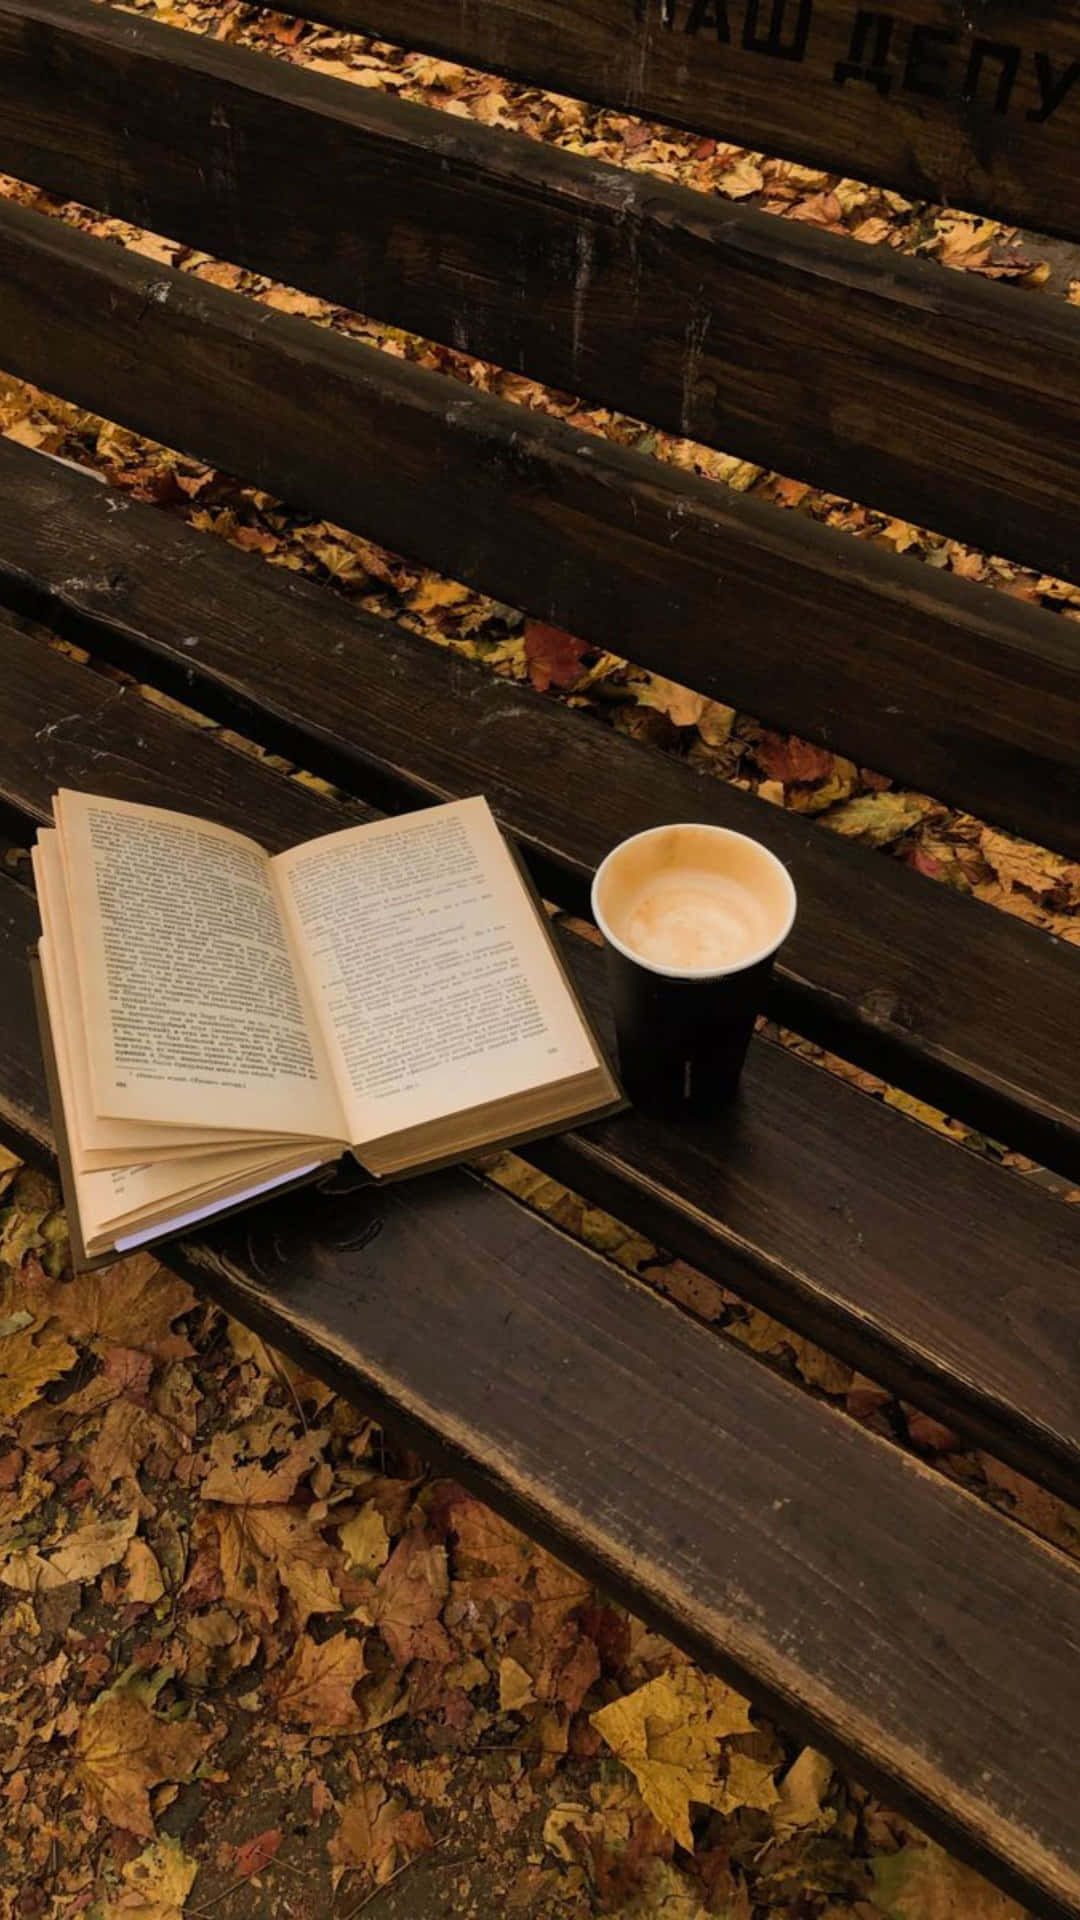 Autumn Reading And Coffee Moment.jpg Wallpaper